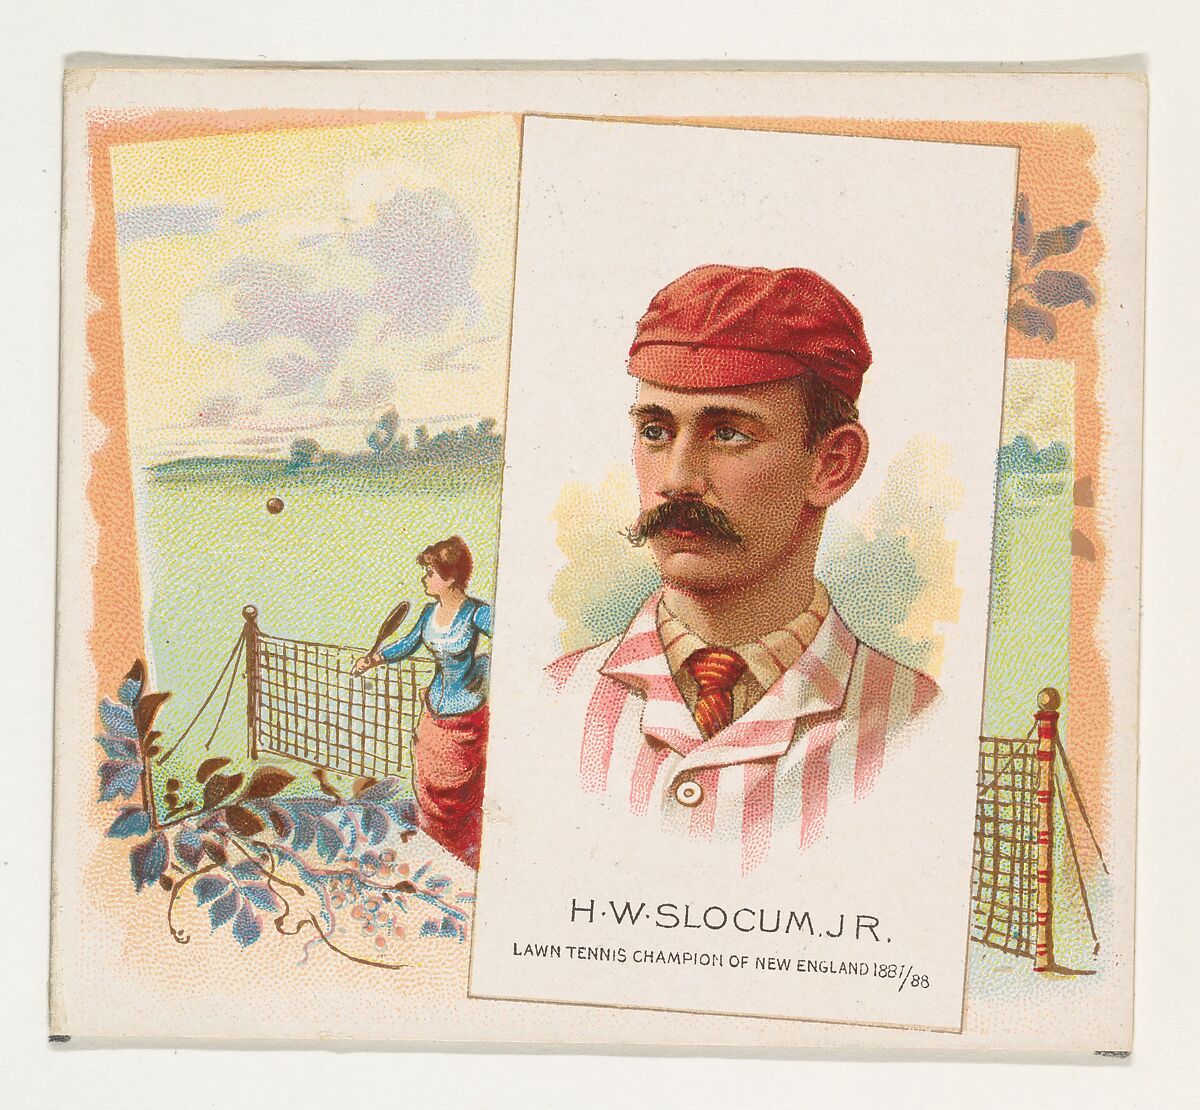 H.W. Slocum, Jr., Lawn Tennis Champion of New England 1887/88, from World's Champions, Second Series (N43) for Allen & Ginter Cigarettes, Allen &amp; Ginter (American, Richmond, Virginia), Commercial lithograph 